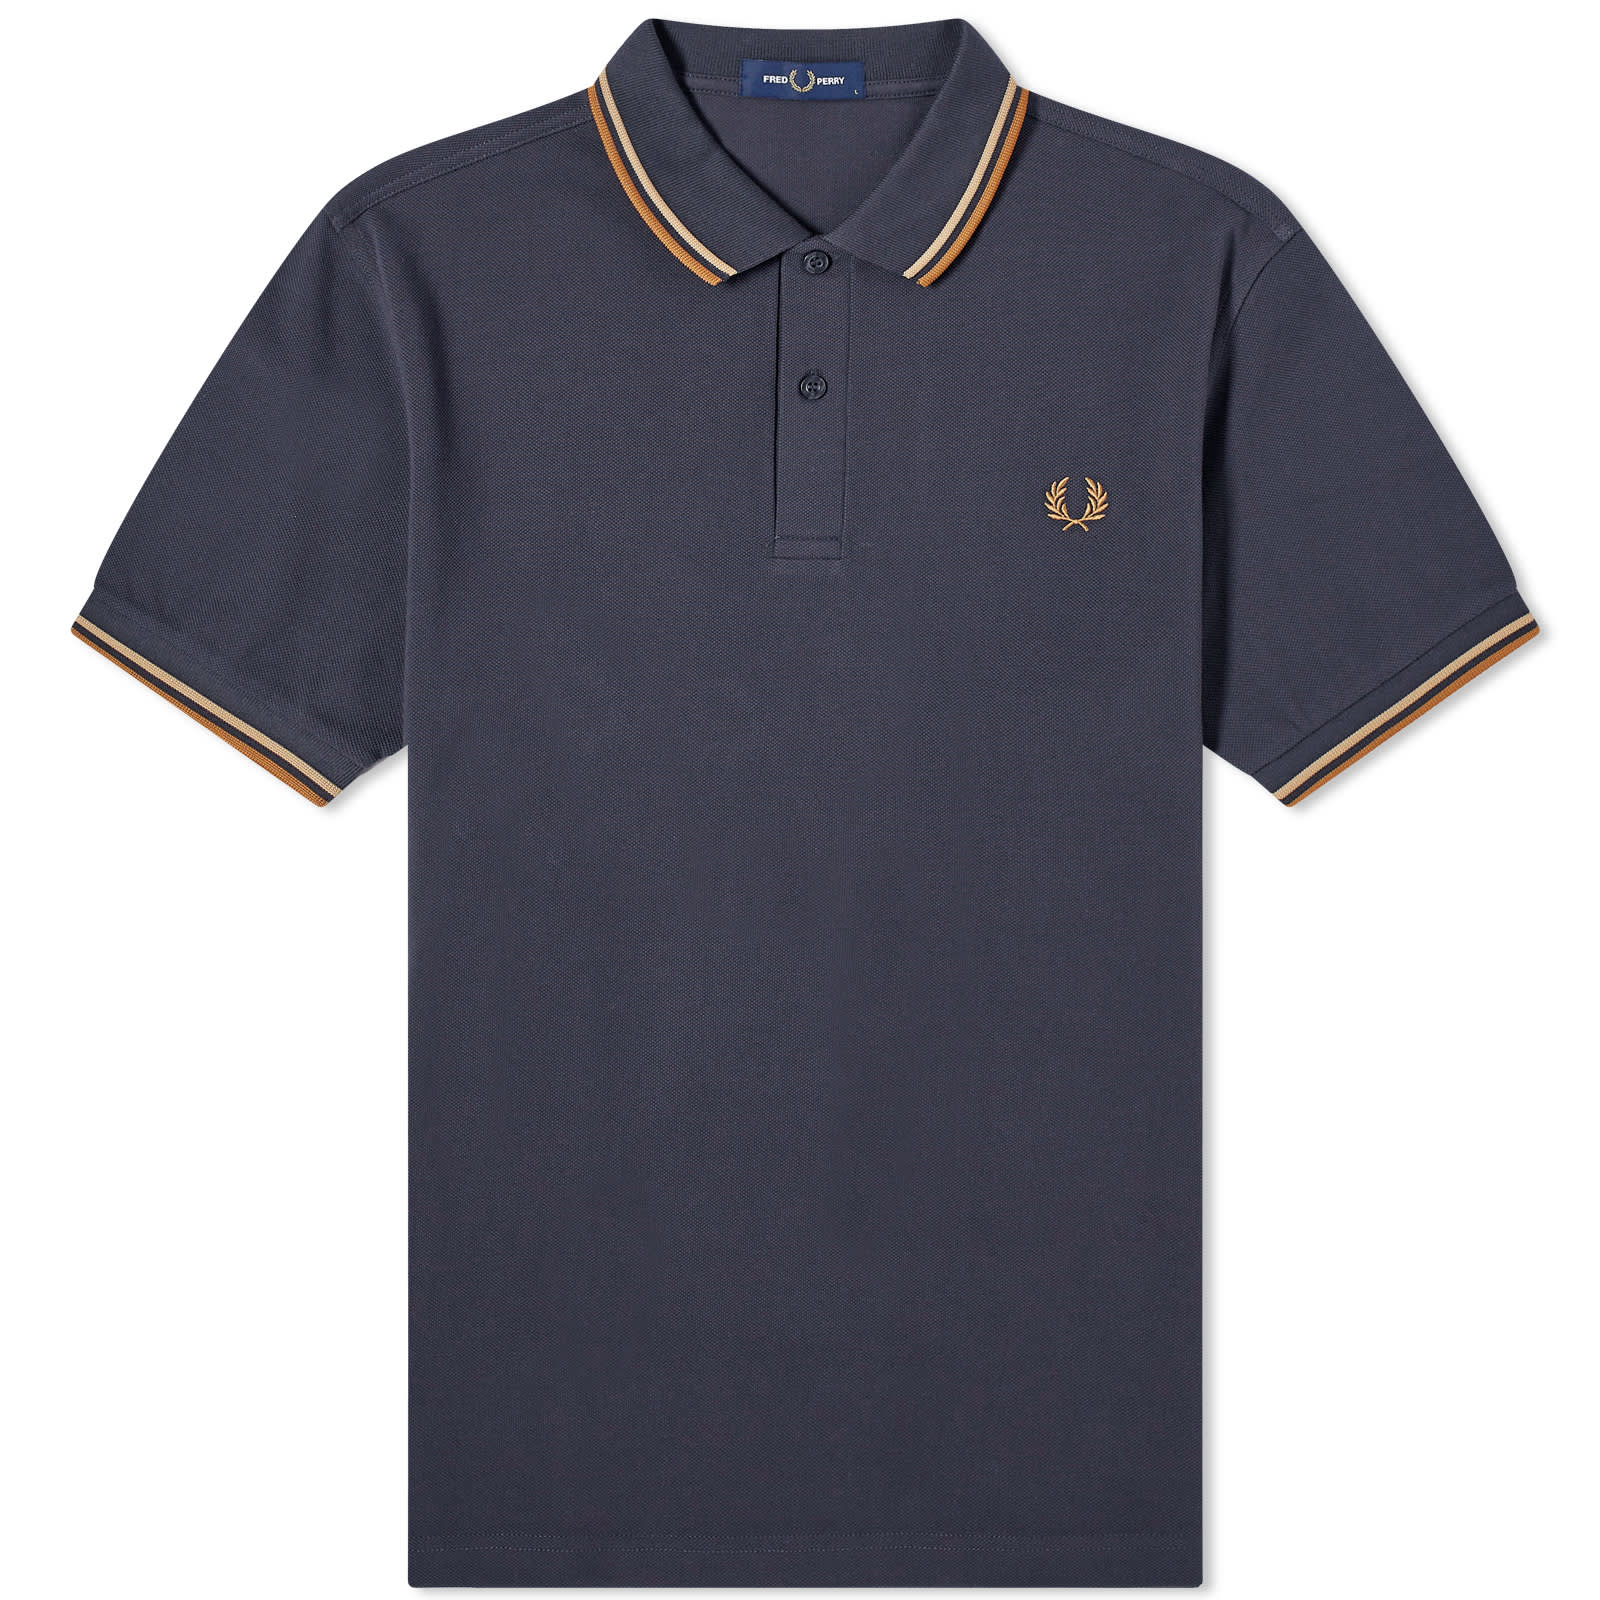 Поло Fred Perry Twin Tipped, цвет Grey, Stone & Caramel поло fred perry twin tipped цвет grey stone